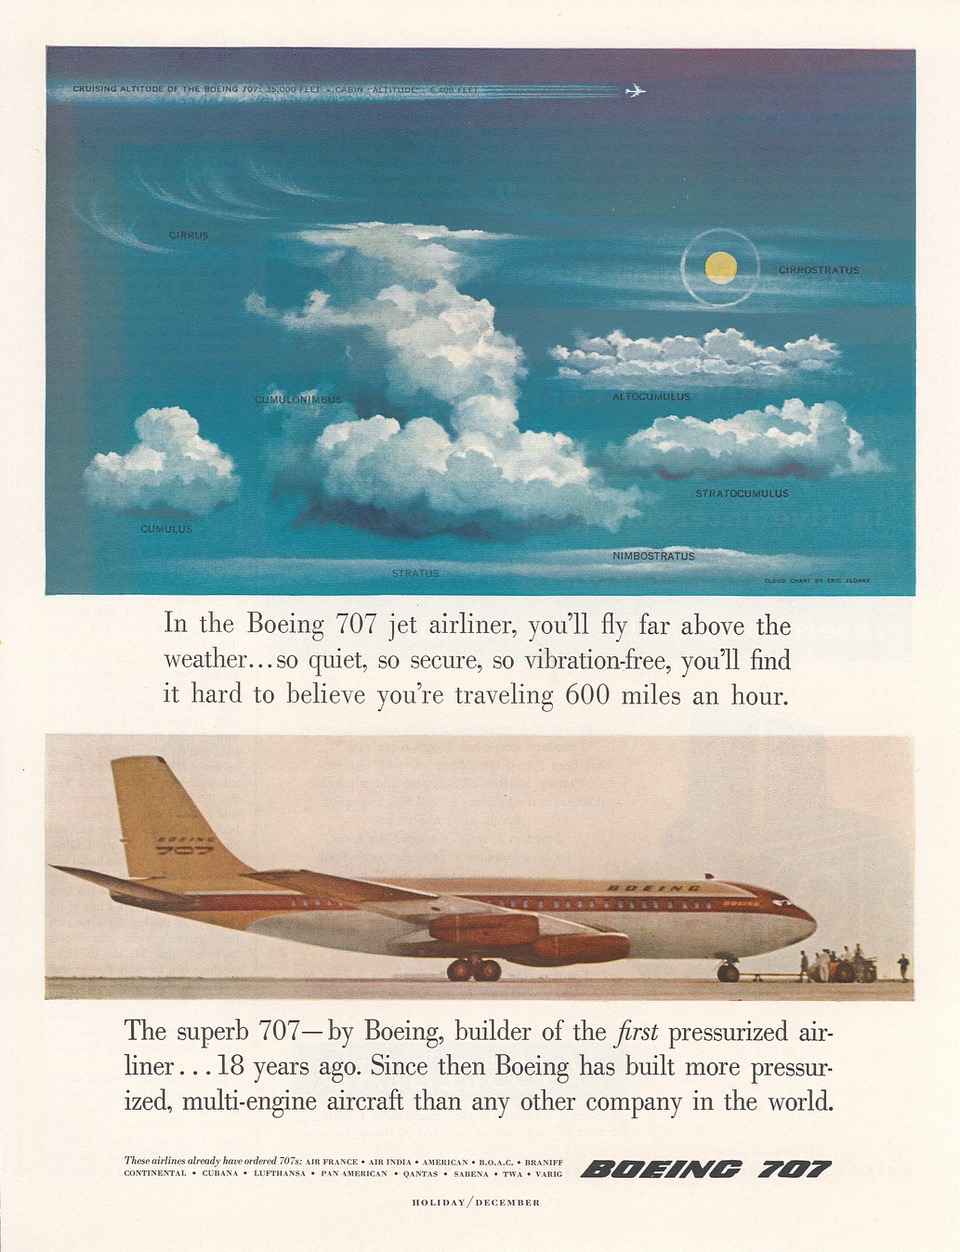 Boeing claimed its new jetliner flew 'above the weather.' Advertisement for a Boeing 707. Scanned from a copy in author’s personal collection.